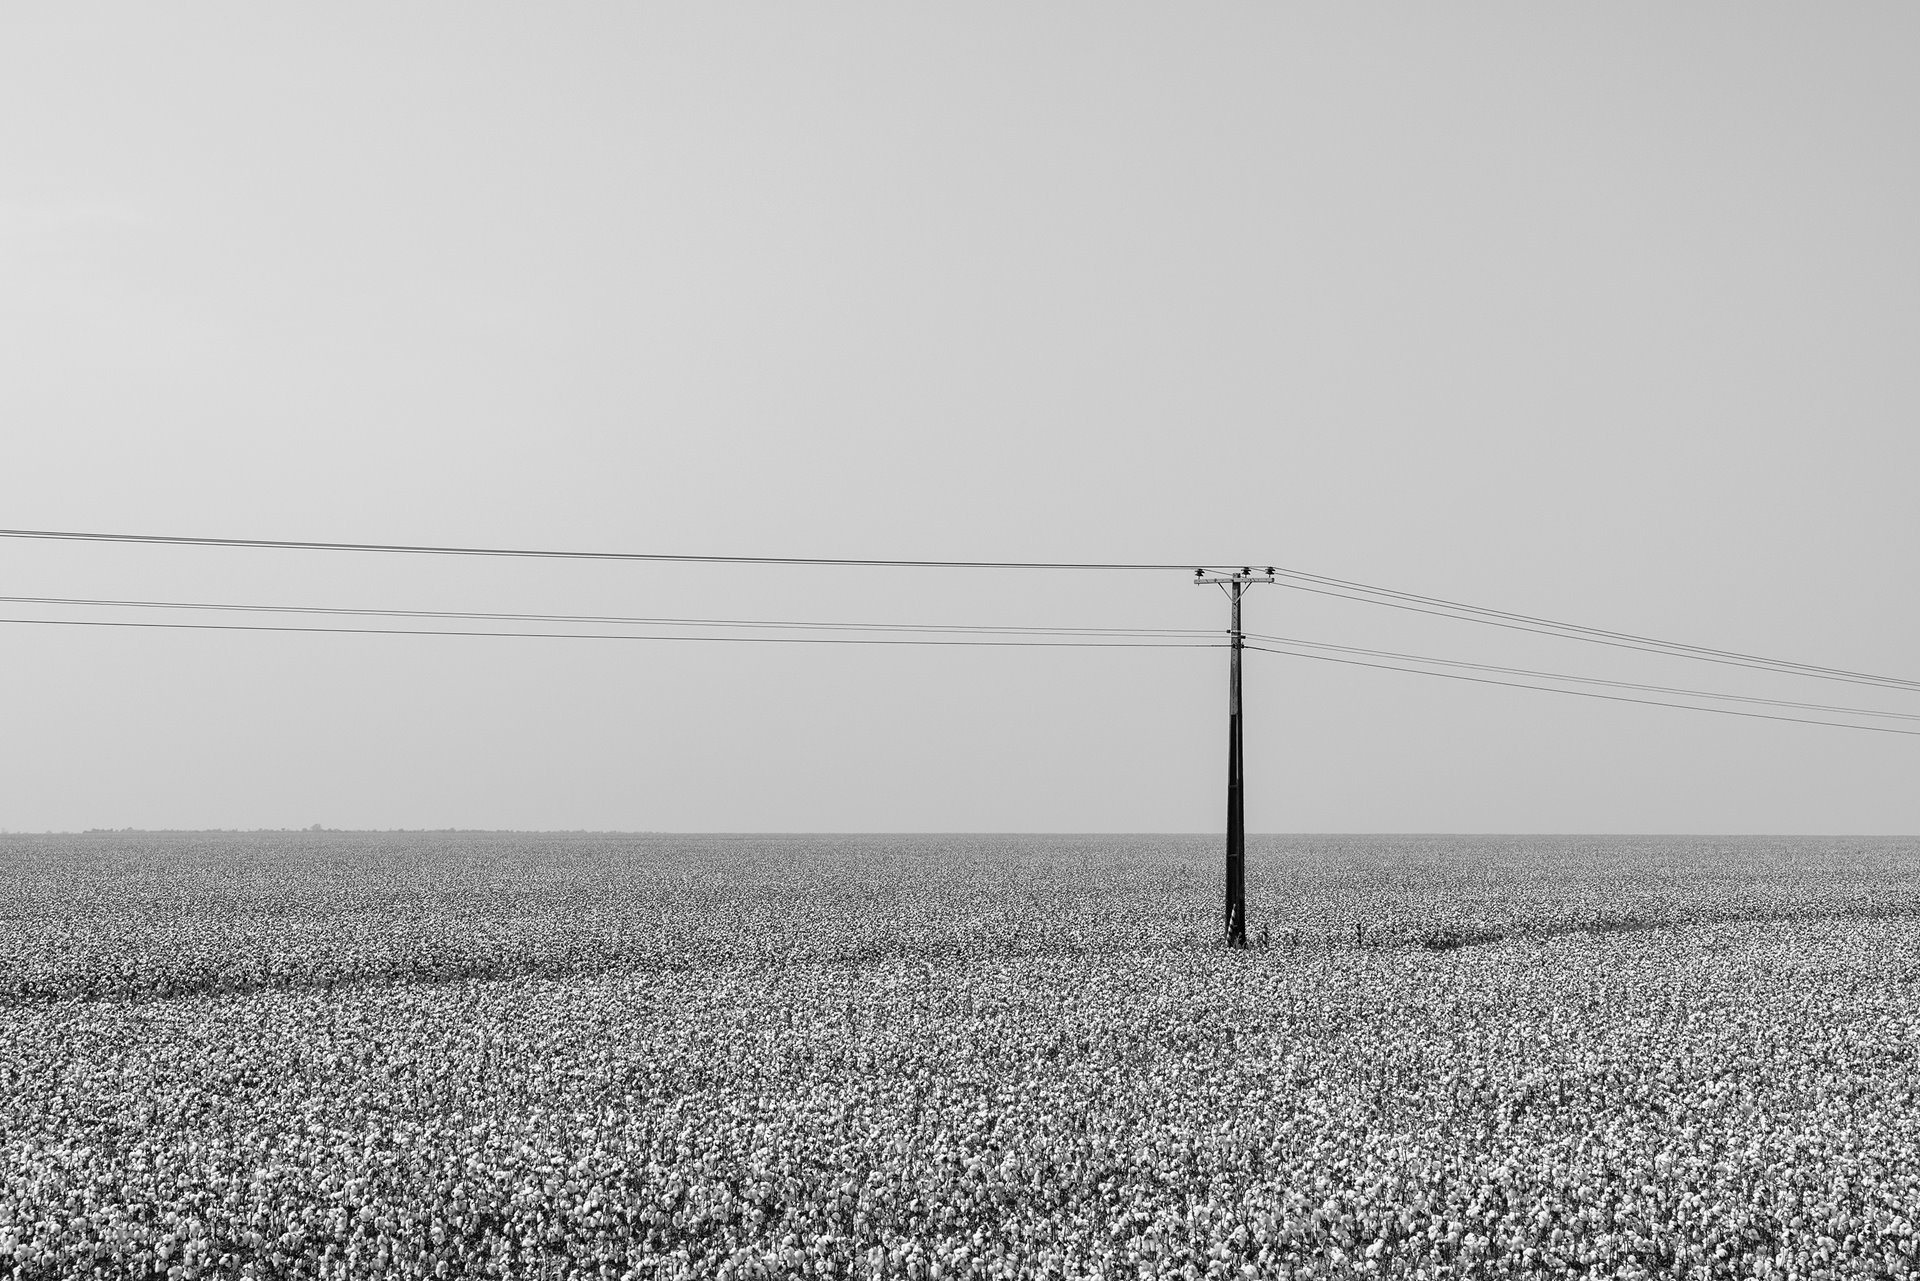 A cotton plantation stretches to the horizon, on the Parecis plateau in northwest Mato Grosso, in the Brazilian Amazon.The region, which functions as a watershed between the Amazon and La Plata basins, has been taken over by intensive agriculture since the 1980s. Land set aside for Indigenous communities &ndash; some of the last remaining rainforest &ndash; is now being given over to soybean farming.